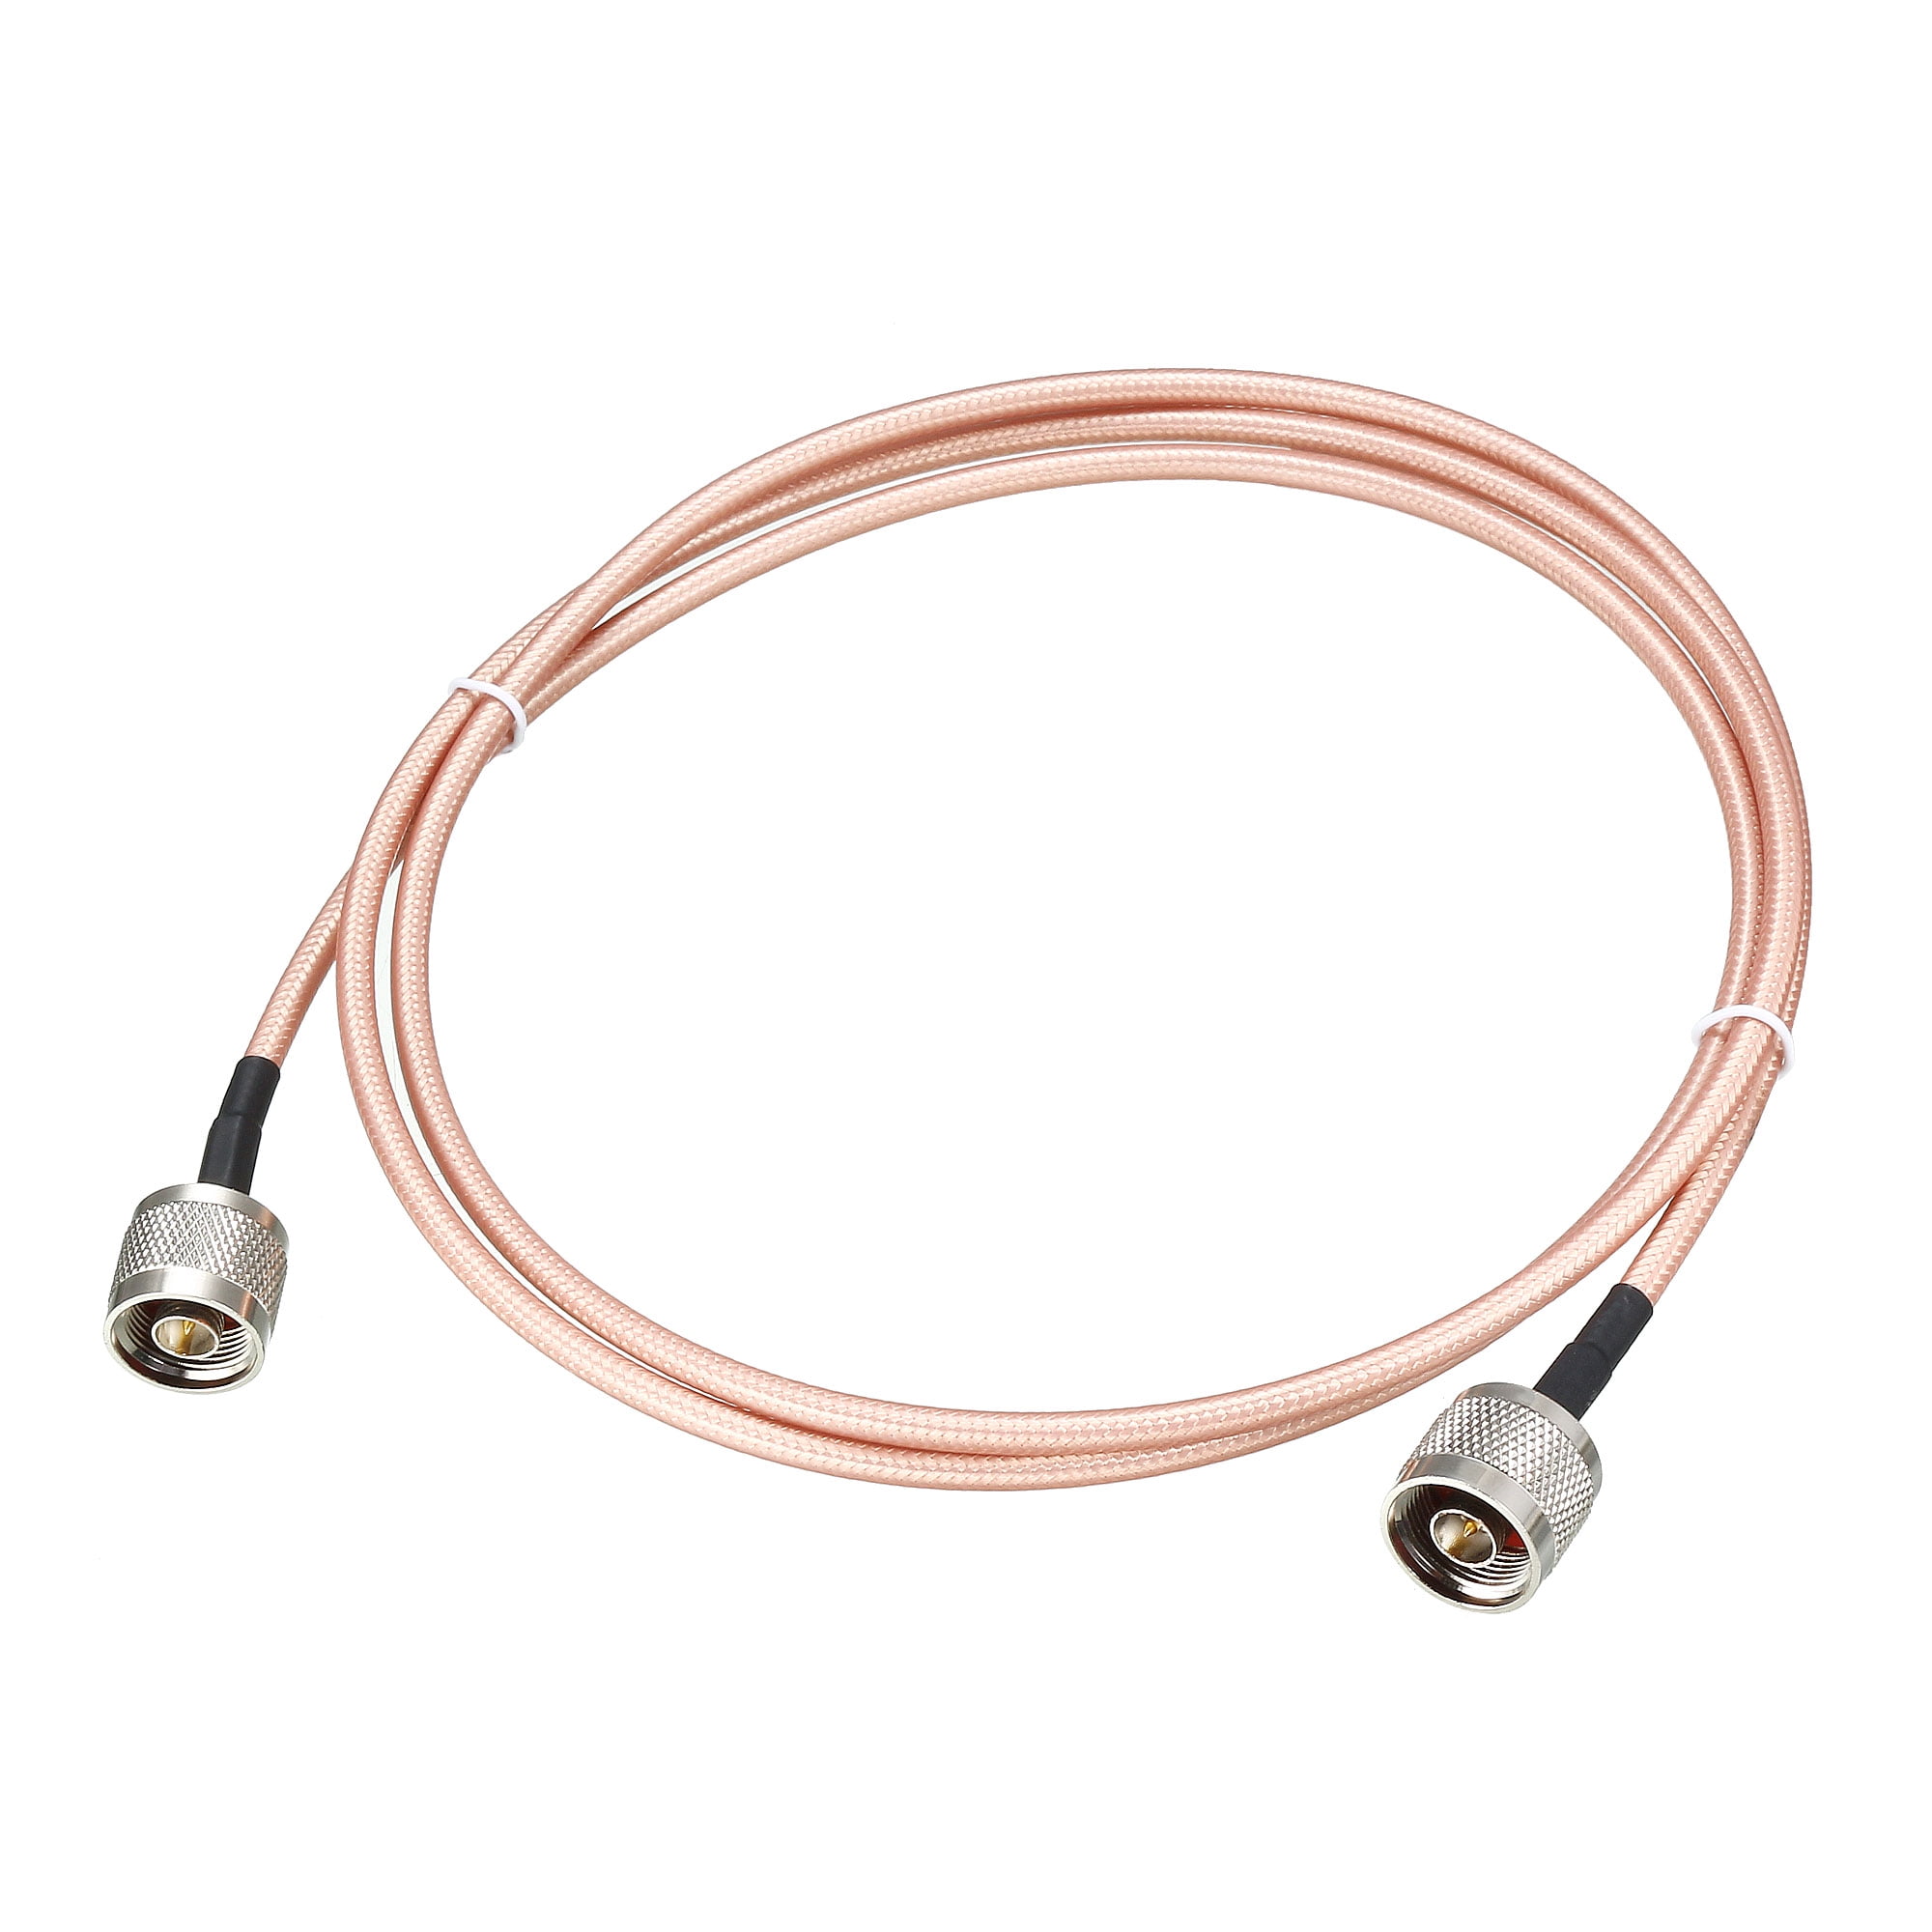 USA-CA RG316 BNC MALE to MINI UHF FEMALE Coaxial RF Pigtail Cable 